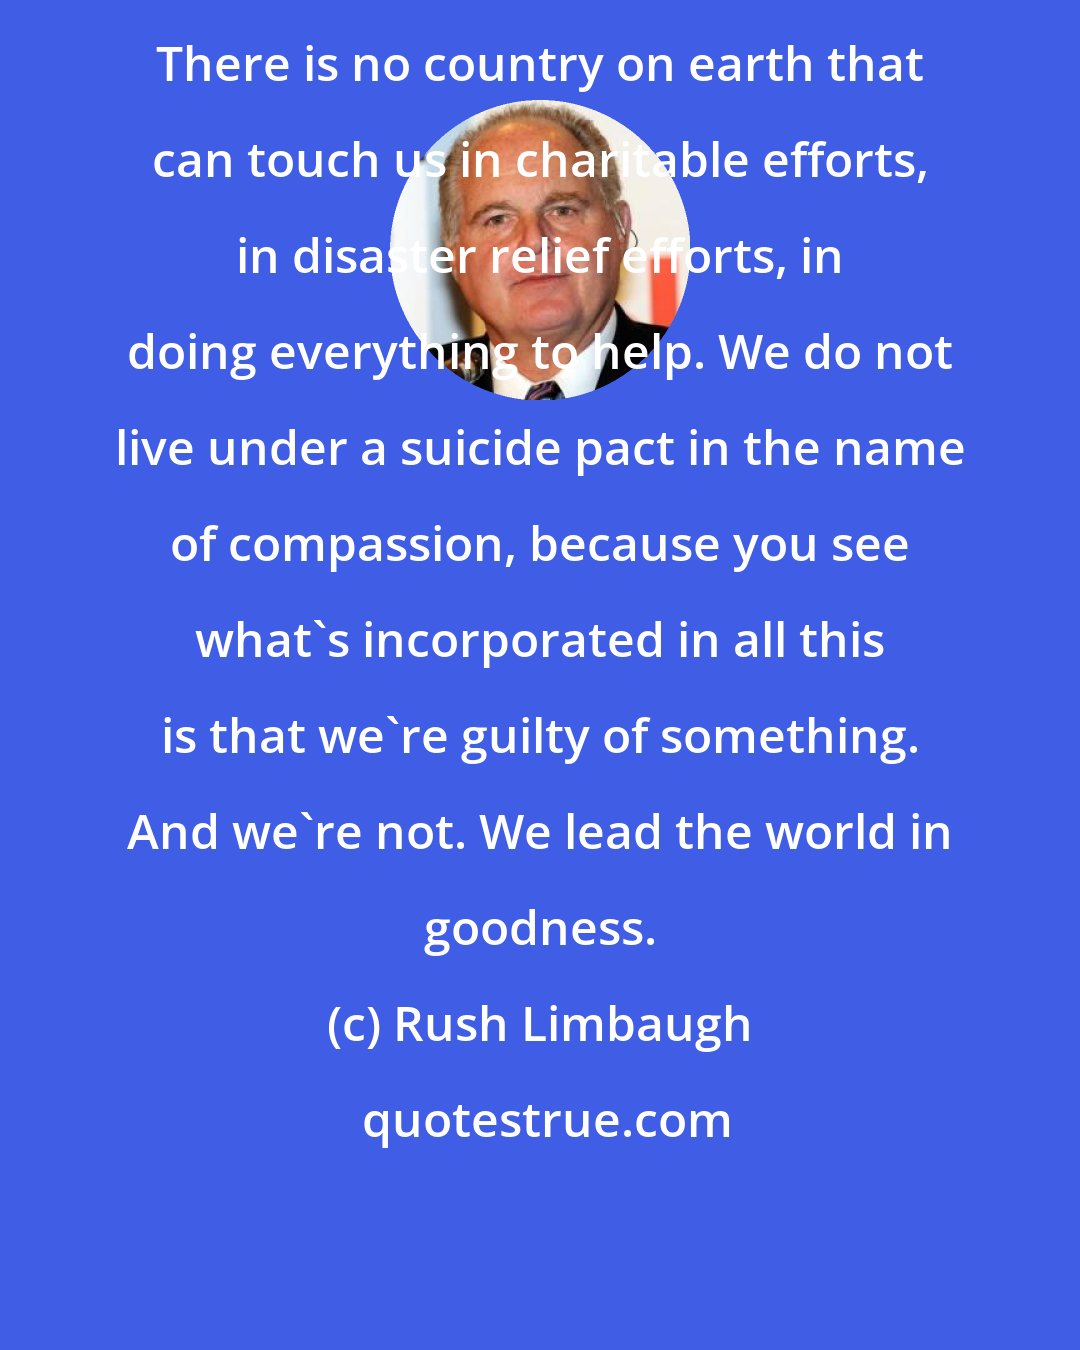 Rush Limbaugh: There is no country on earth that can touch us in charitable efforts, in disaster relief efforts, in doing everything to help. We do not live under a suicide pact in the name of compassion, because you see what's incorporated in all this is that we're guilty of something. And we're not. We lead the world in goodness.